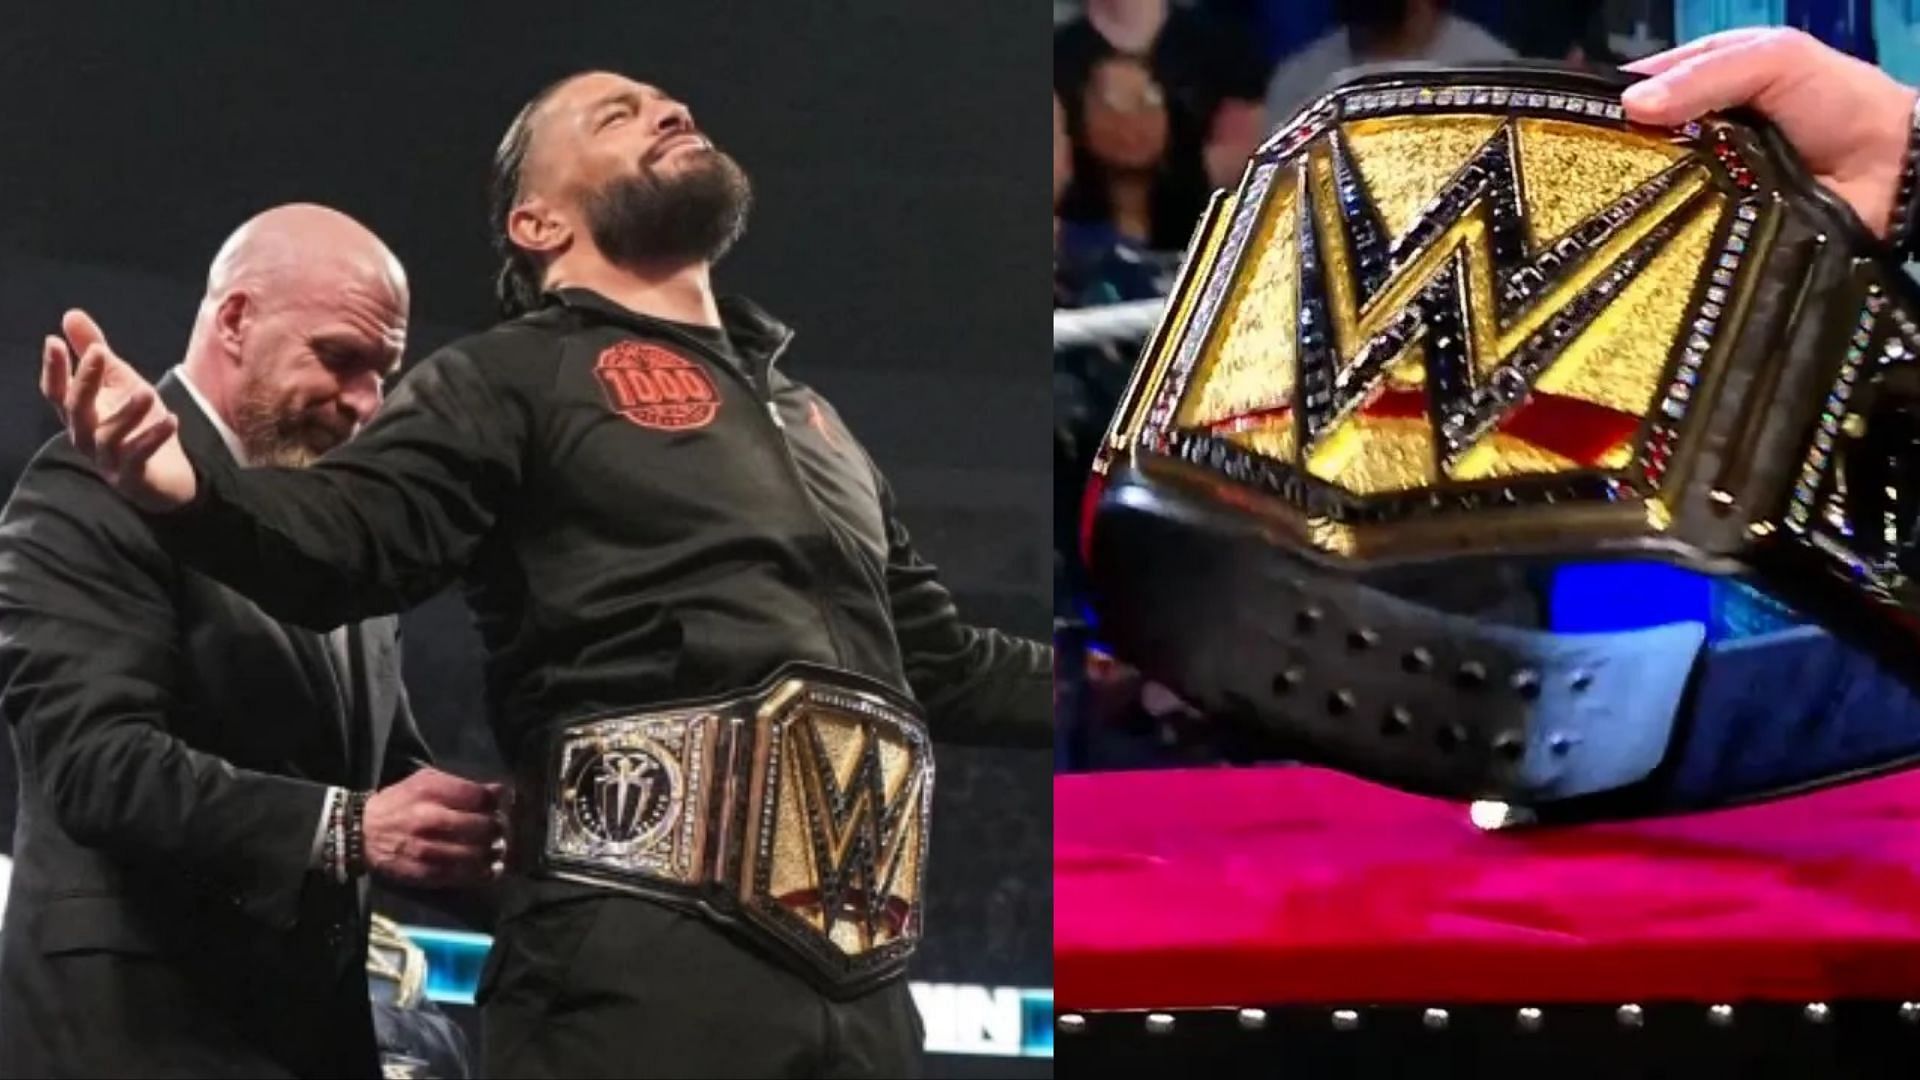 Roman Reigns is the current title holder